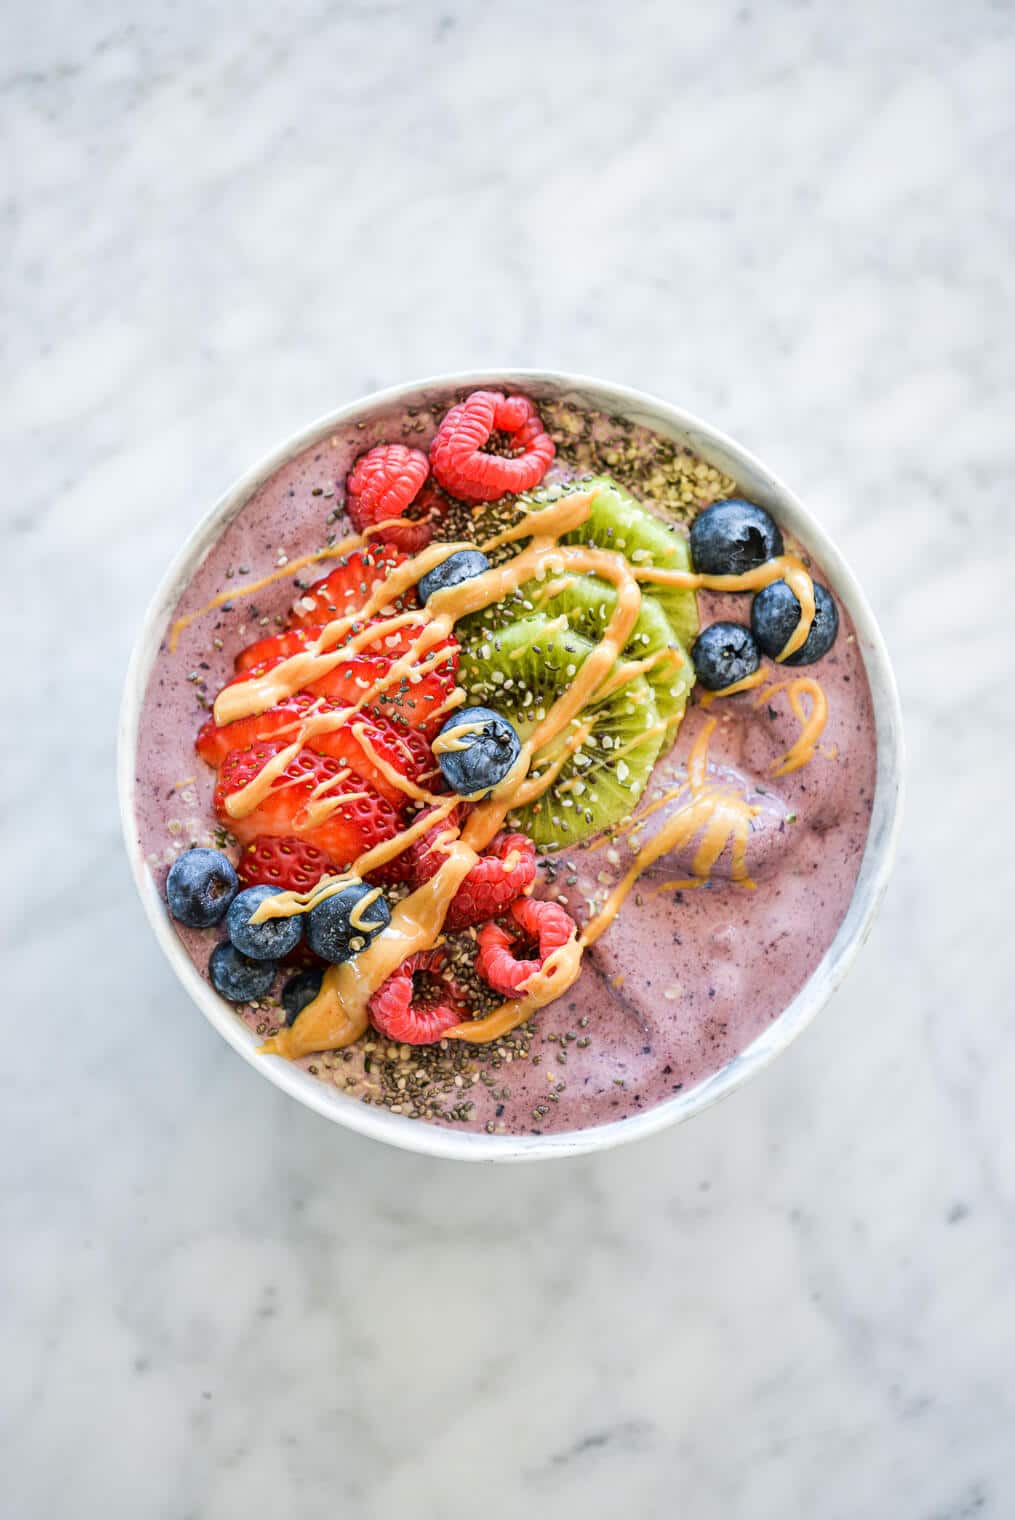 Acai smoothie bowl topped with assortment of fruit, chia seeds, and peanut butter